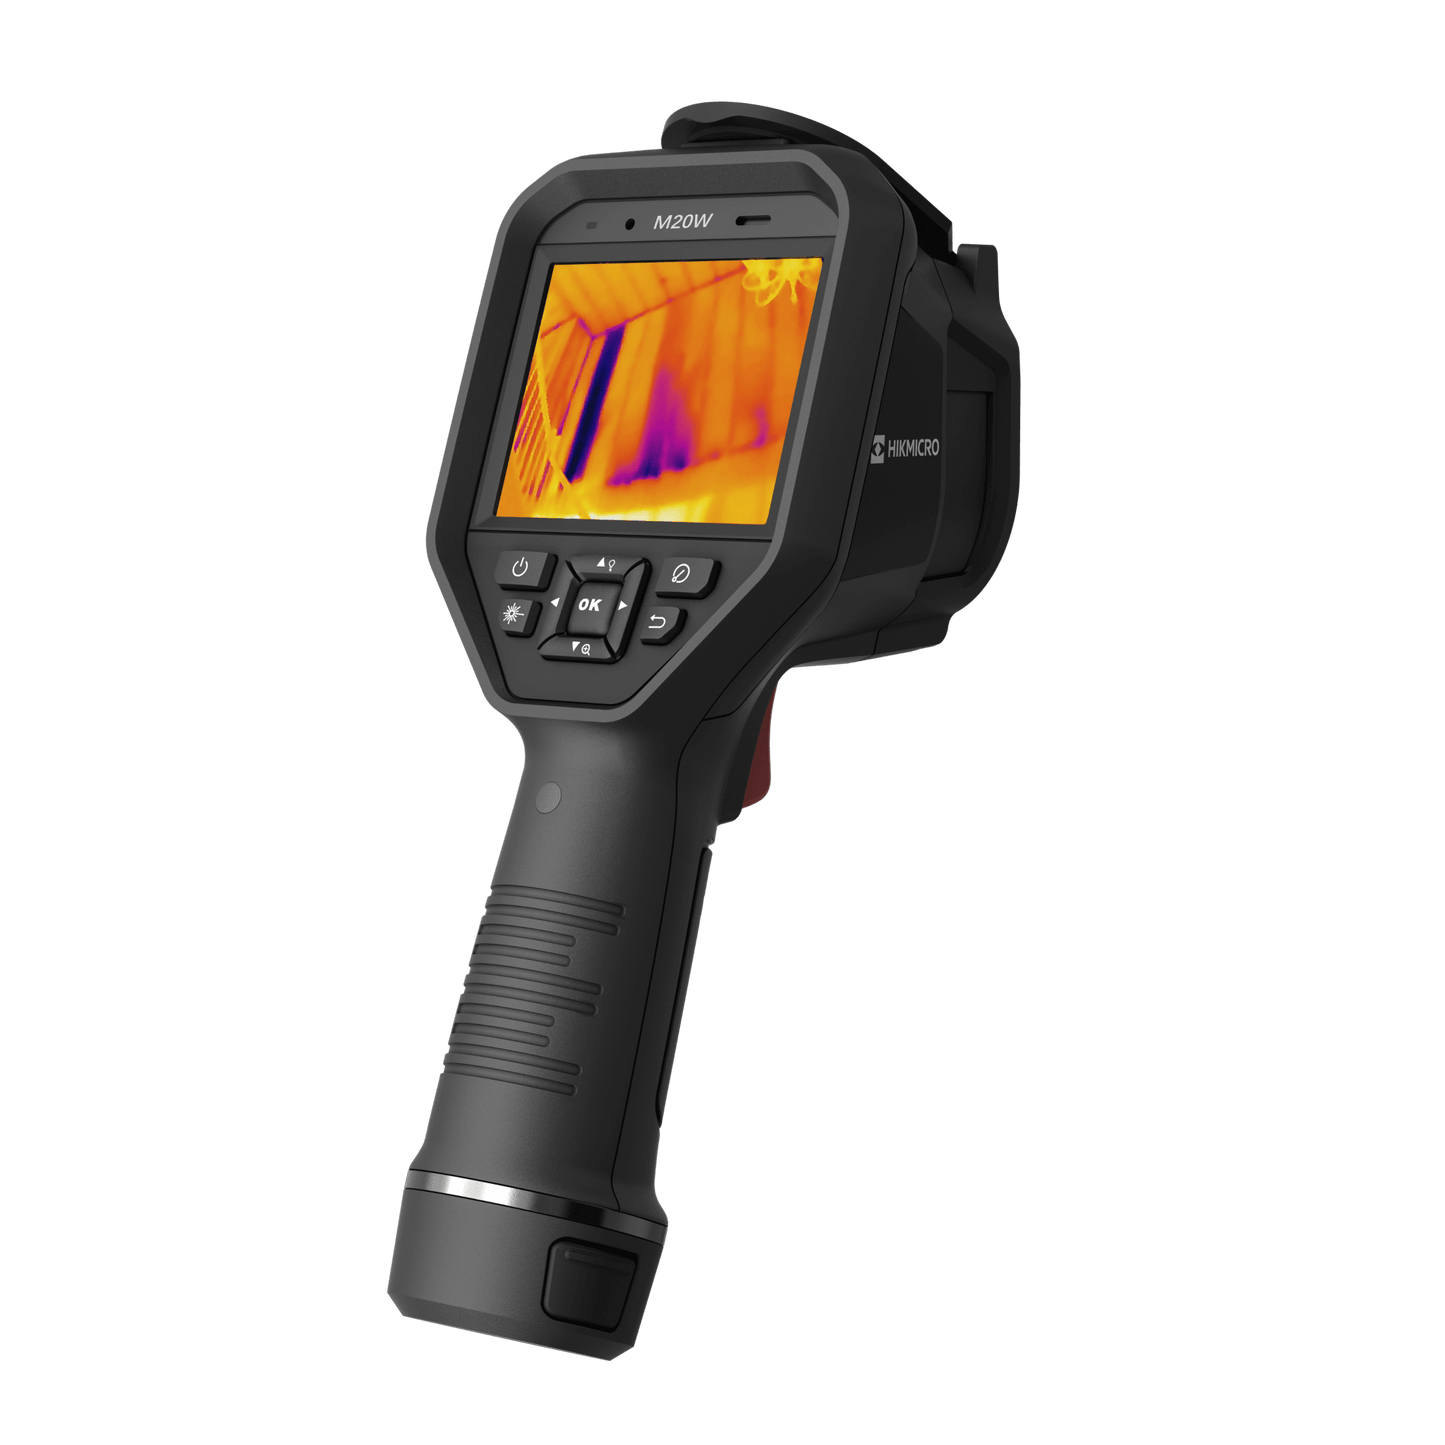 HikMicro M20W Handheld Thermography Camera on a transparent background - Rear Right View Alternative